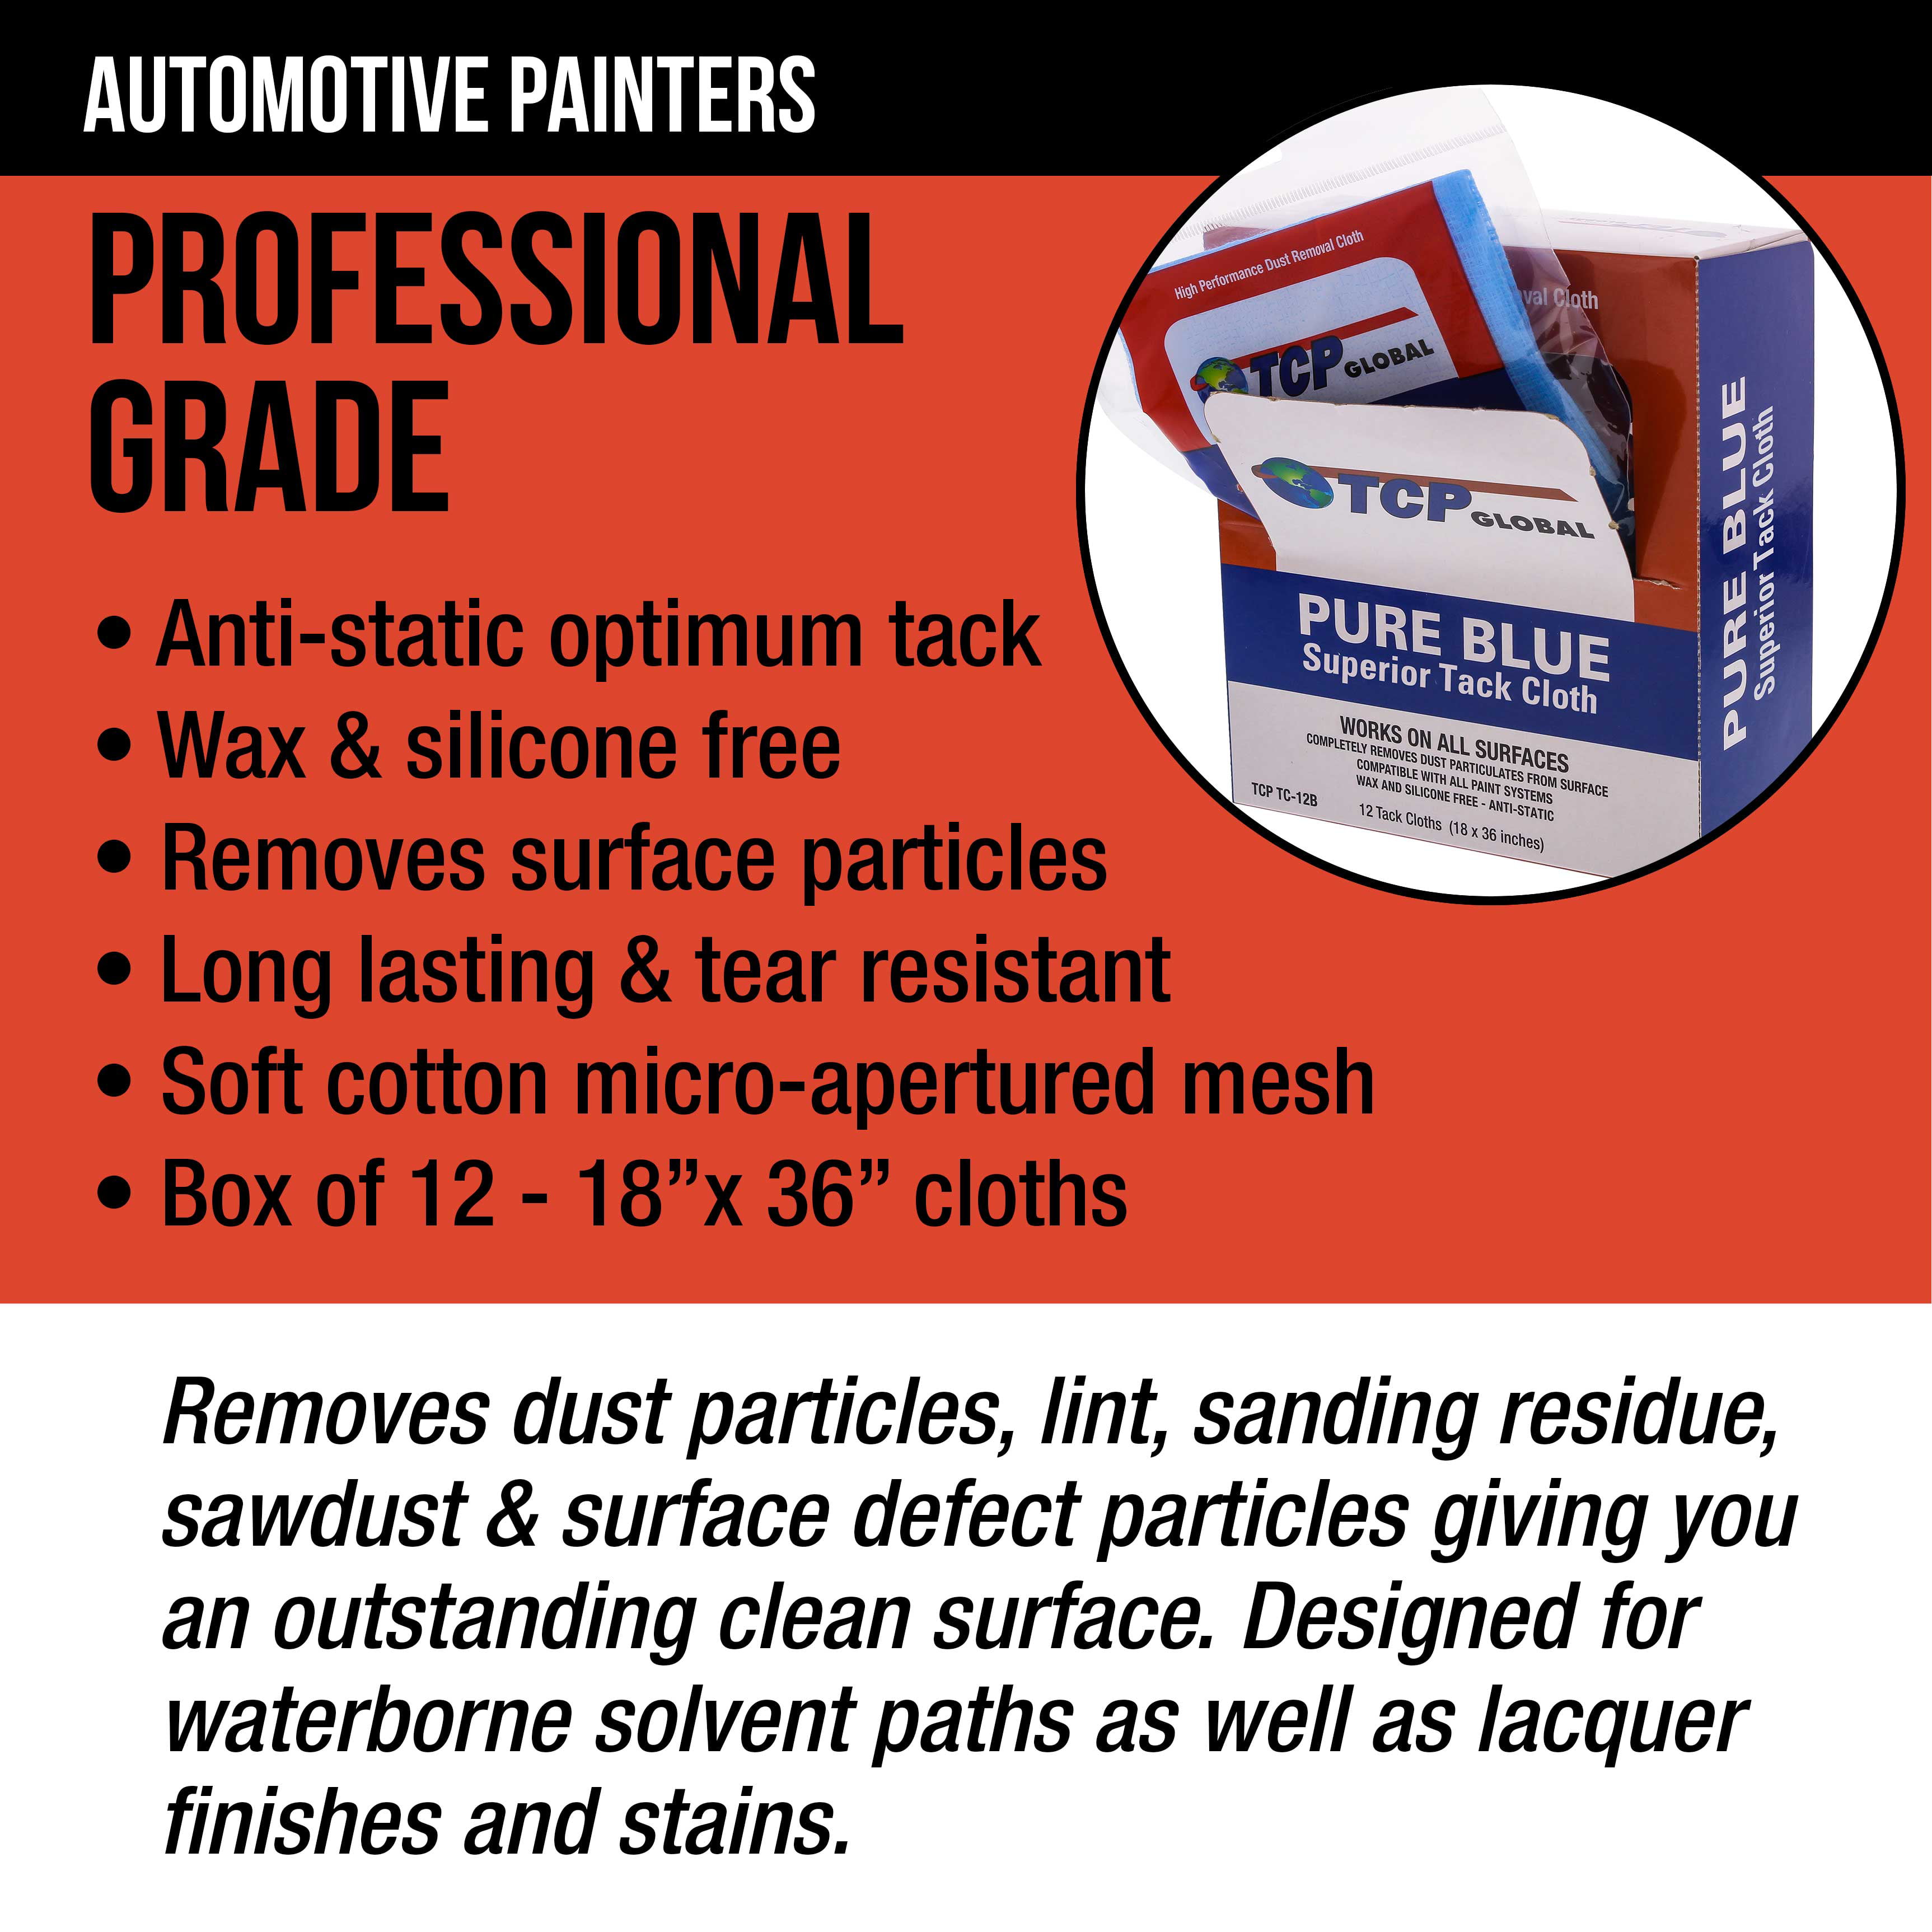 TCP Global - Pure Blue Low Tack Superior Tack Cloths - Tack Rags (Case of 144), Automotive Car Painters, Removes Dust Sanding Particles, Cleans